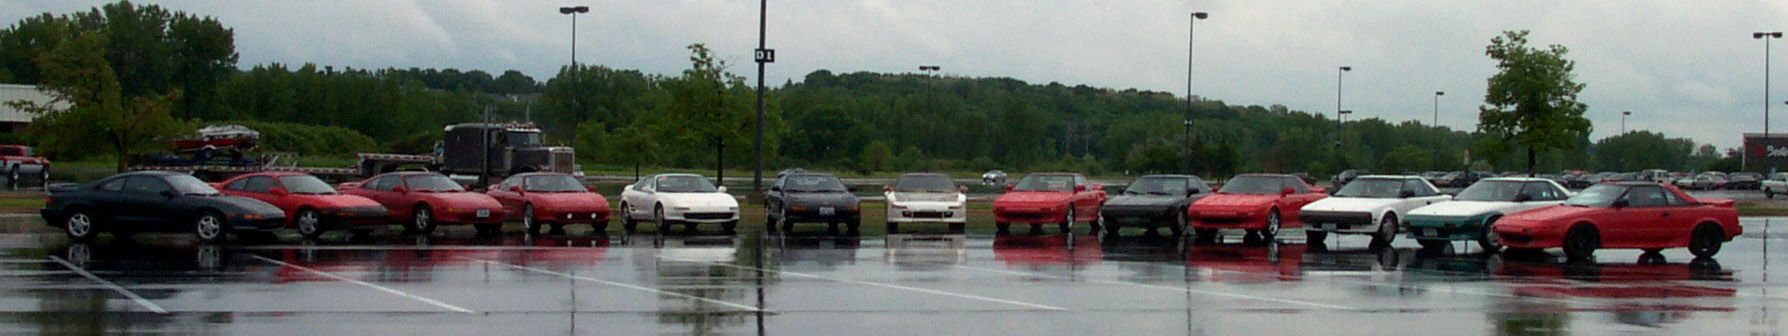 The MR2s